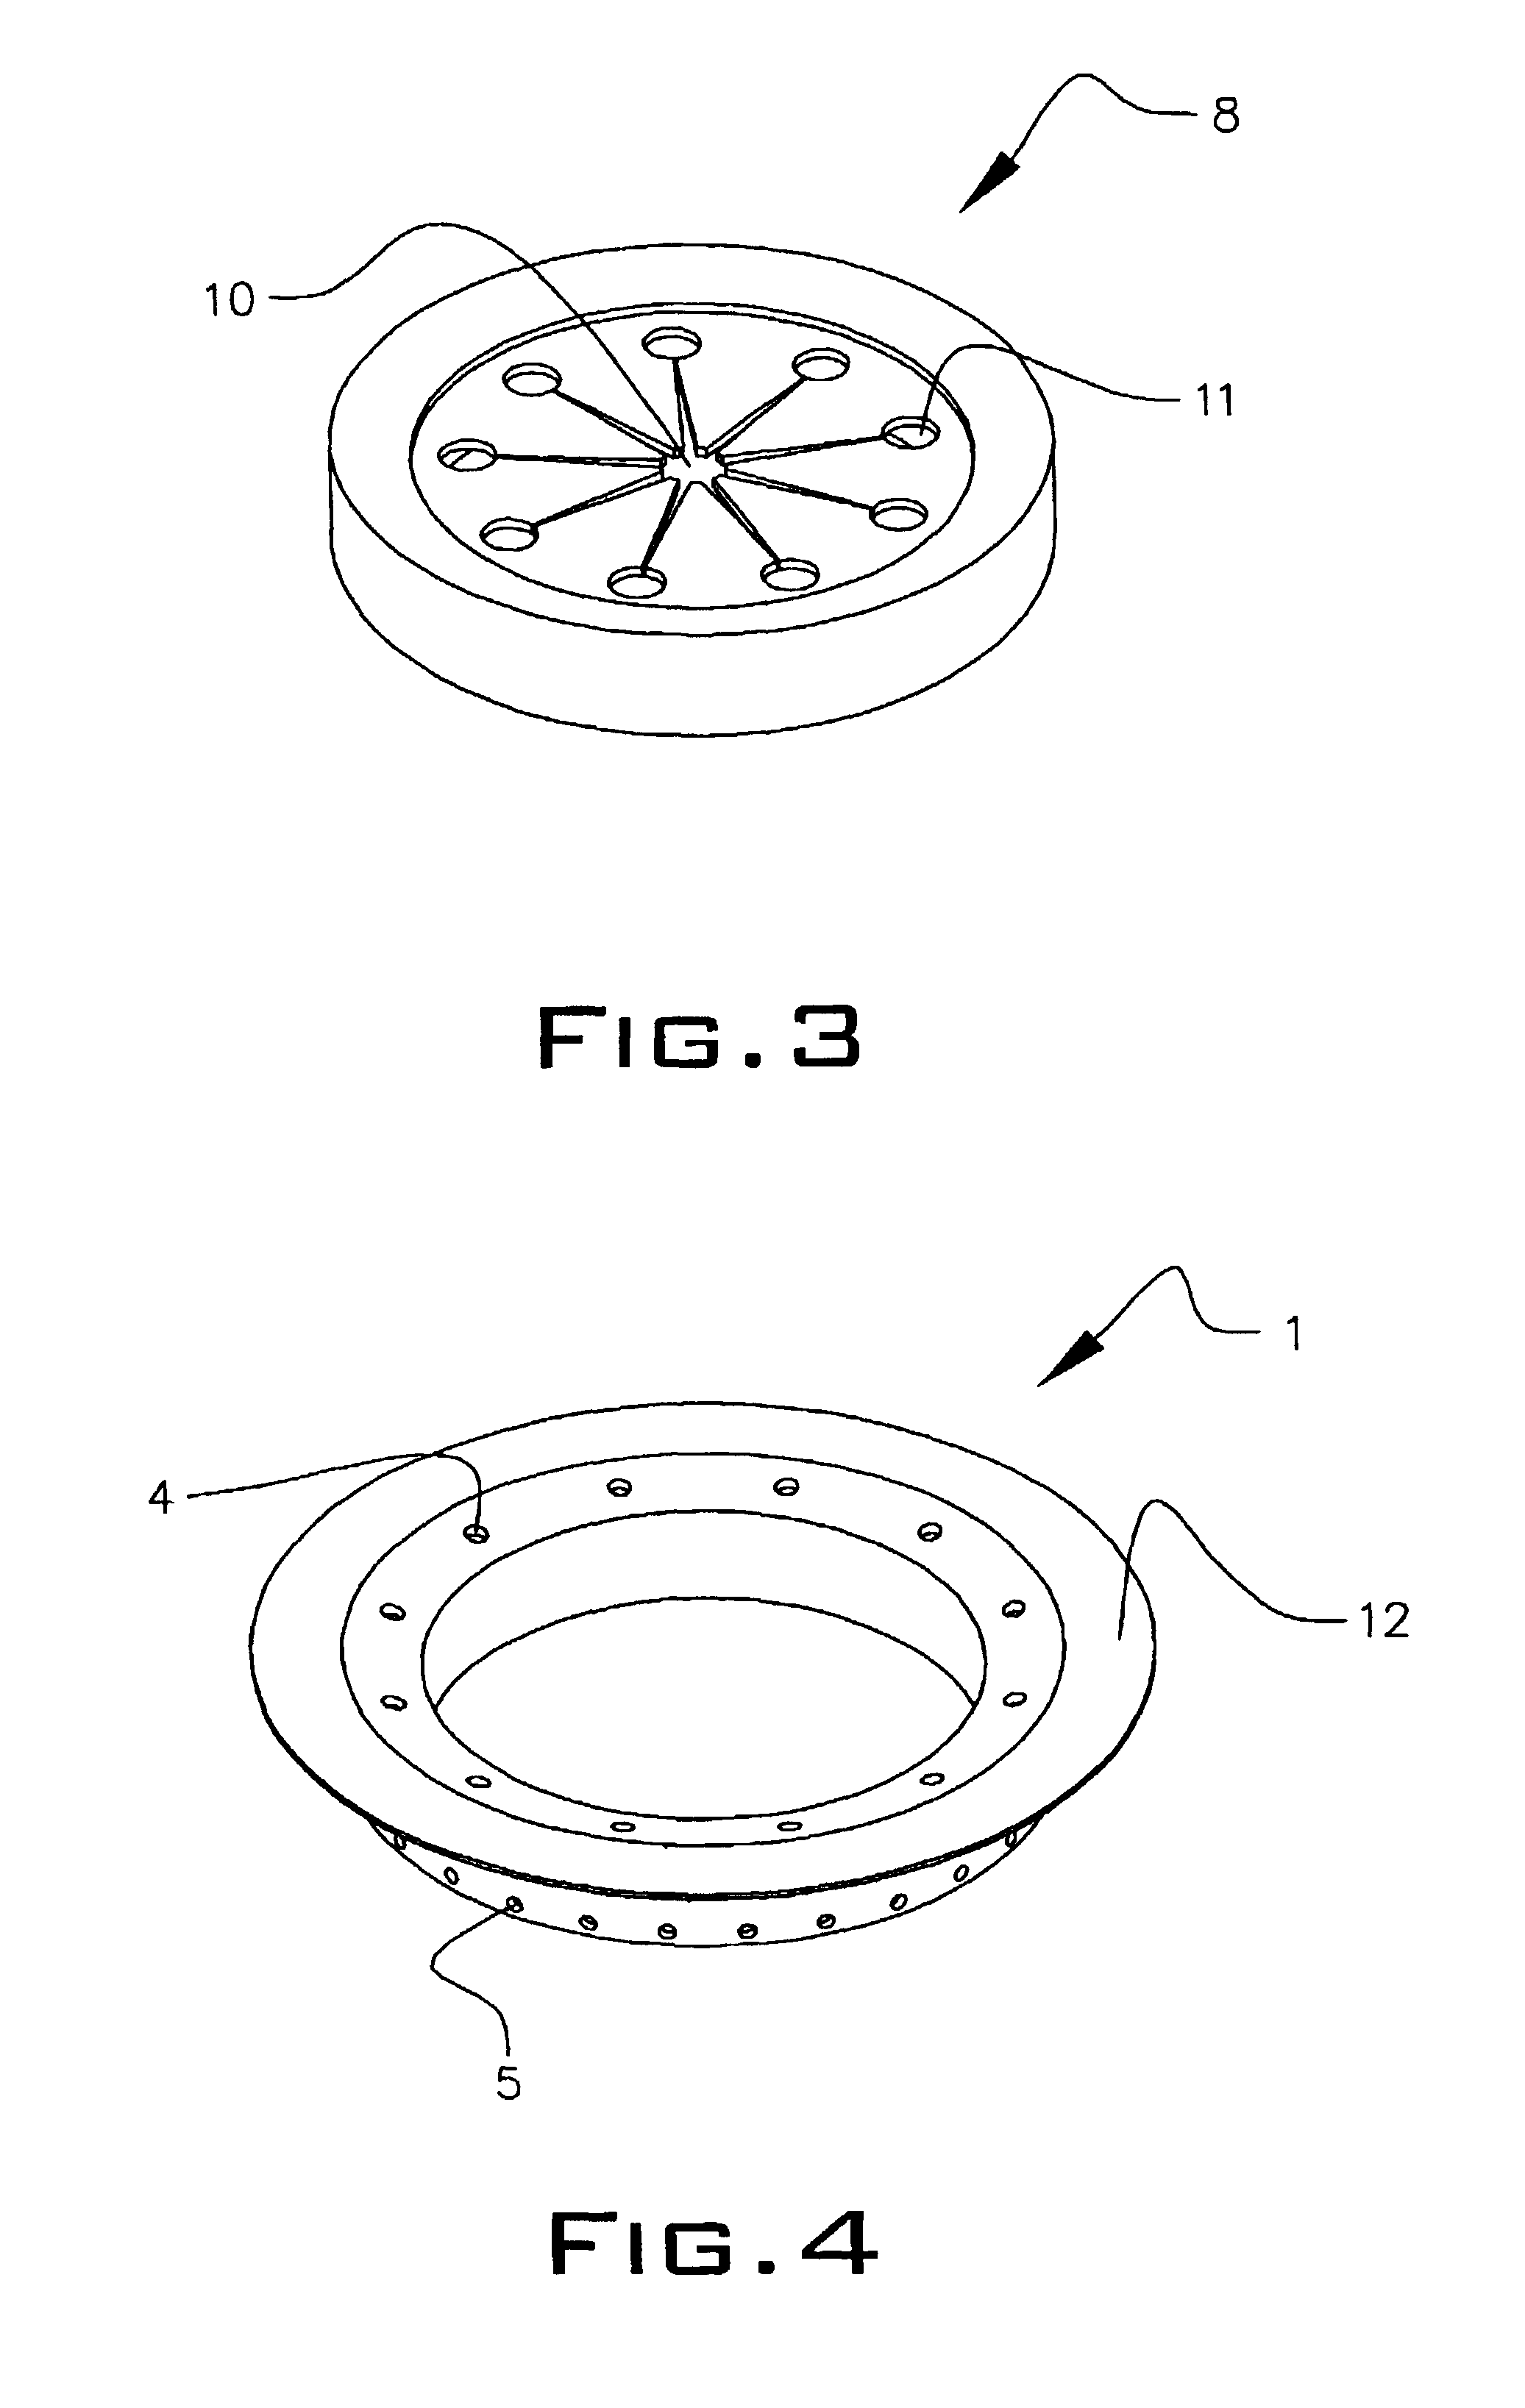 Slime remover and slime preventing/removing agent containing a clathrate compound